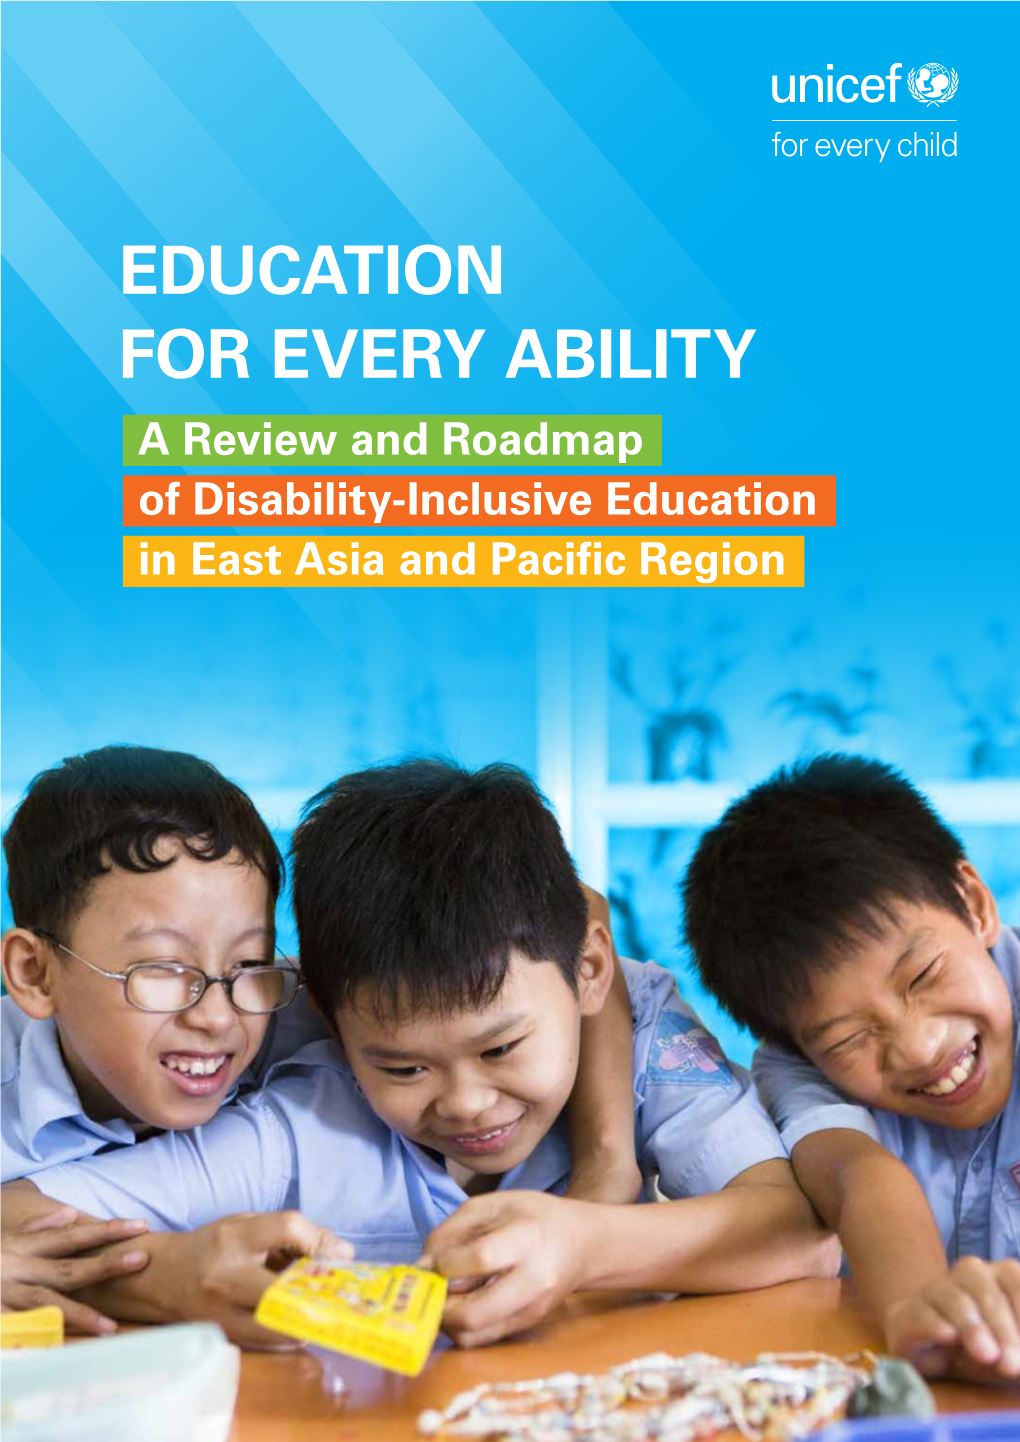 EDUCATION for EVERY ABILITY a Review and Roadmap of Disability-Inclusive Education in East Asia and Pacific Region